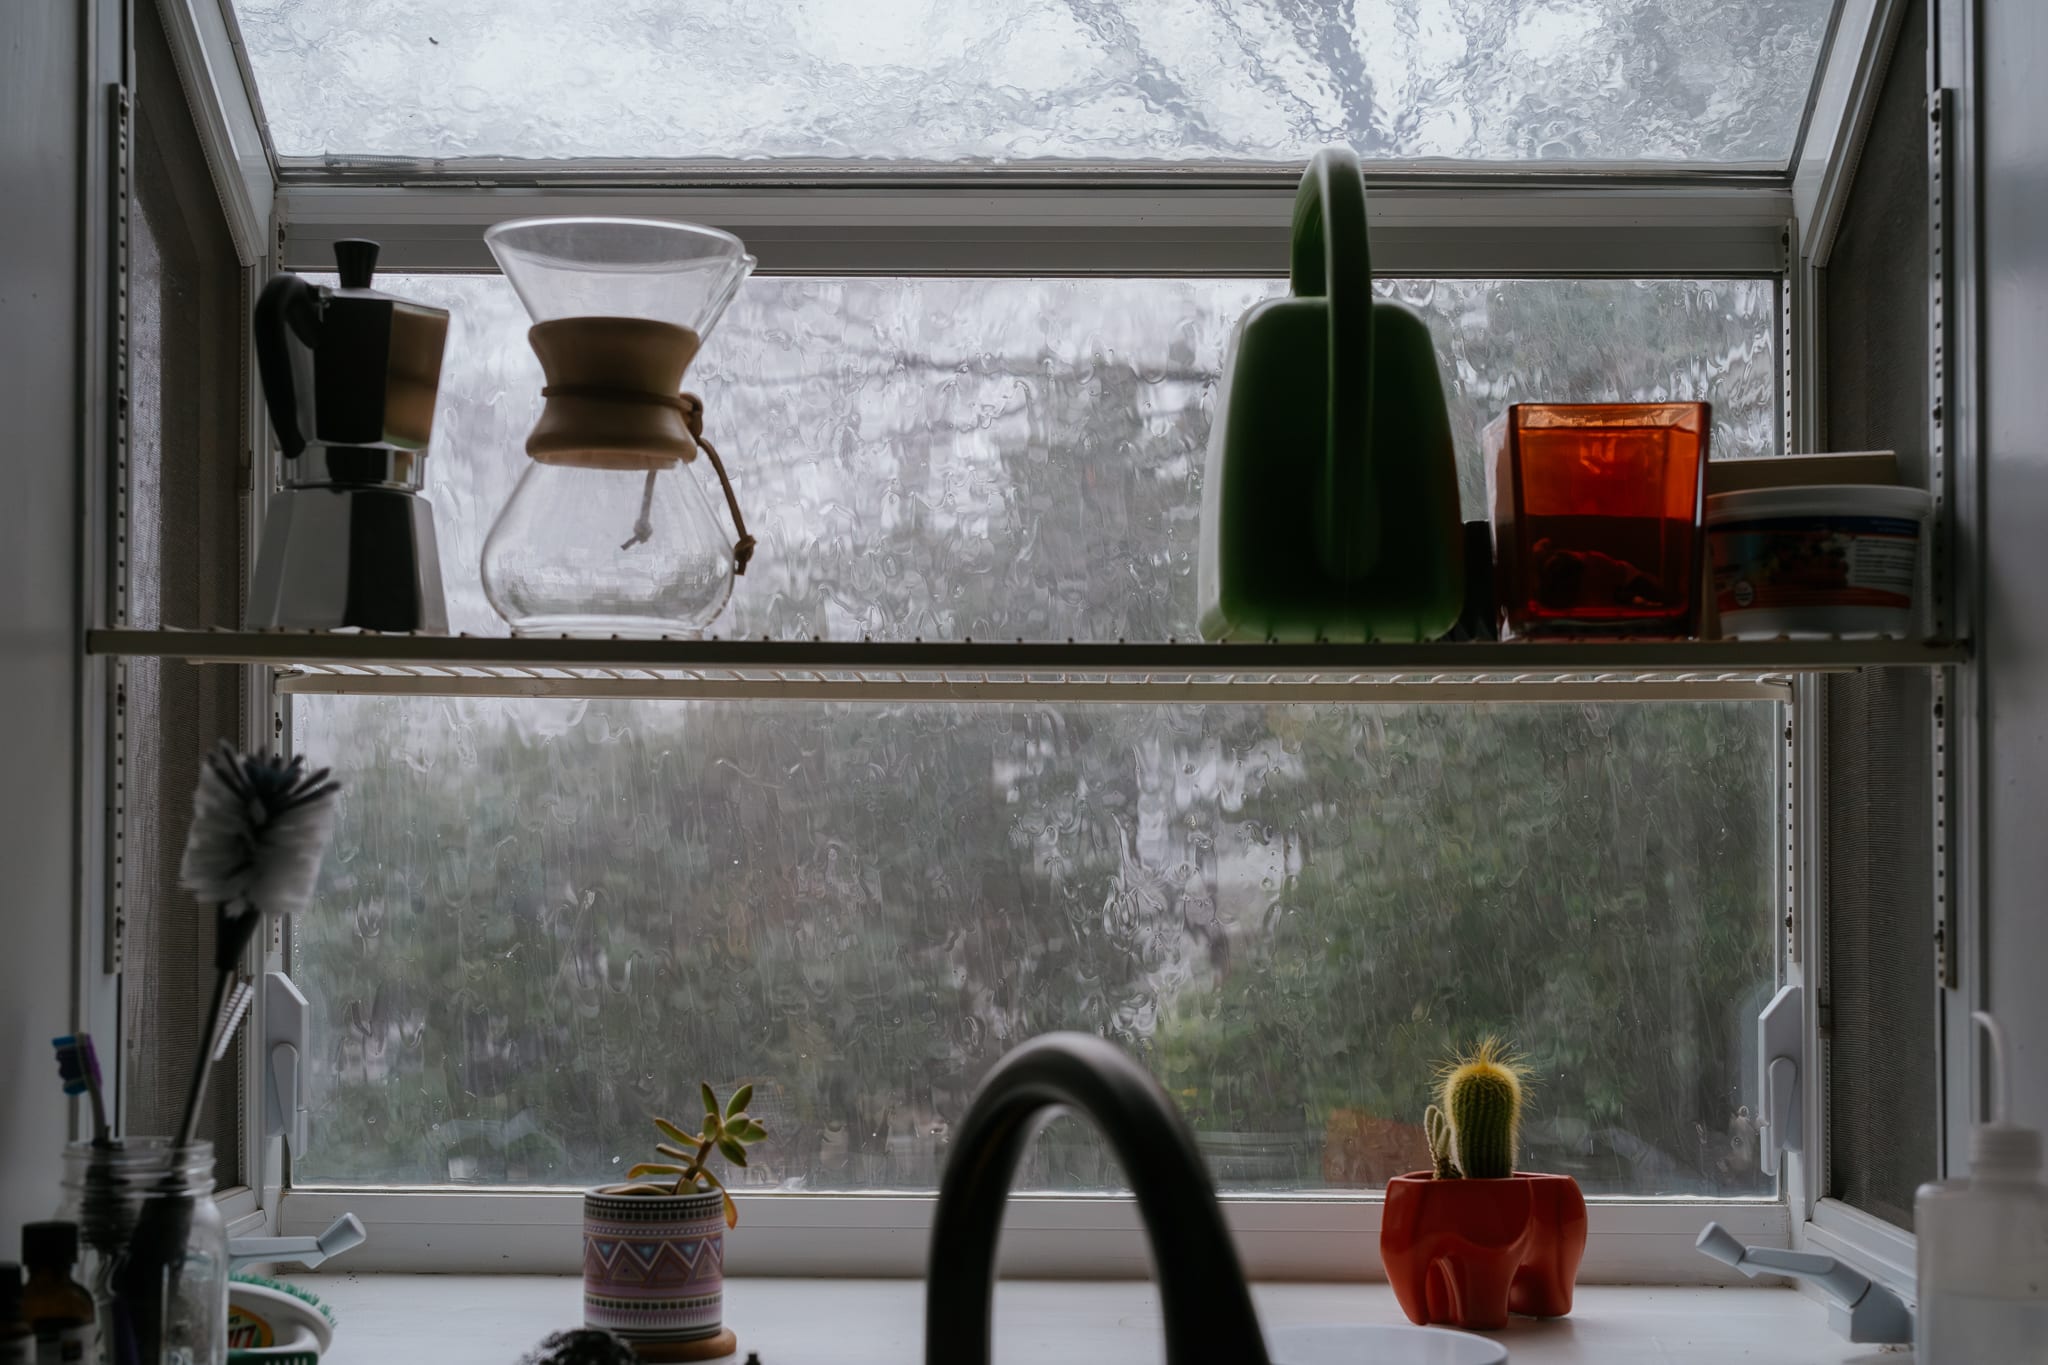 a moka pot, chemex coffee maker, water pitcher, plant food, a succulent and cactus sitting in a garden window during heavy rain